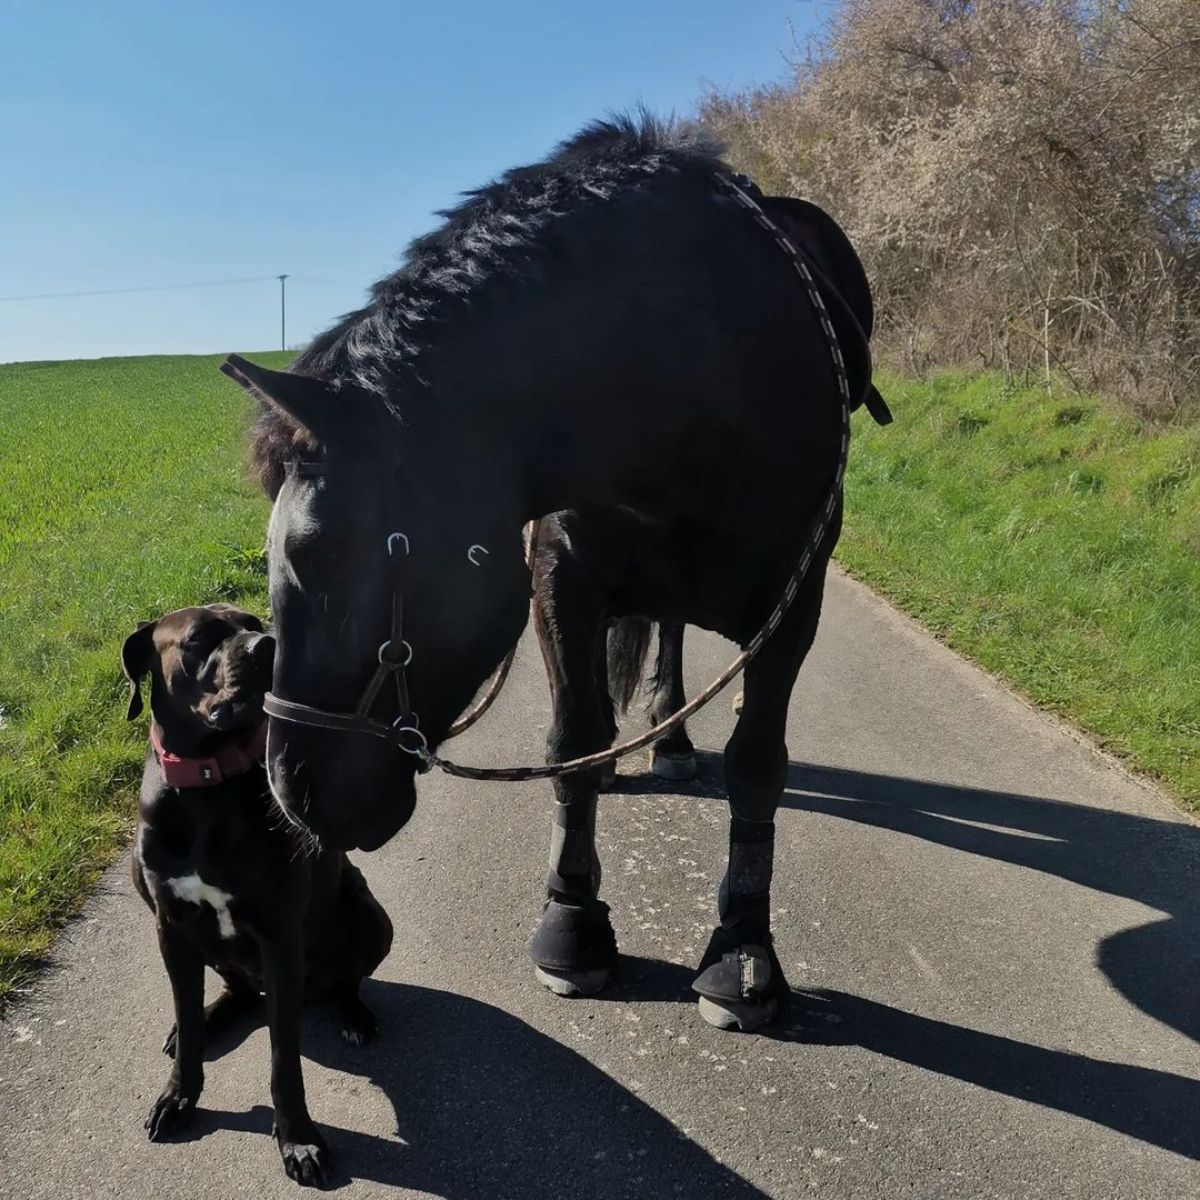 A huge black Noriker horse stands on the road next to a black dog.